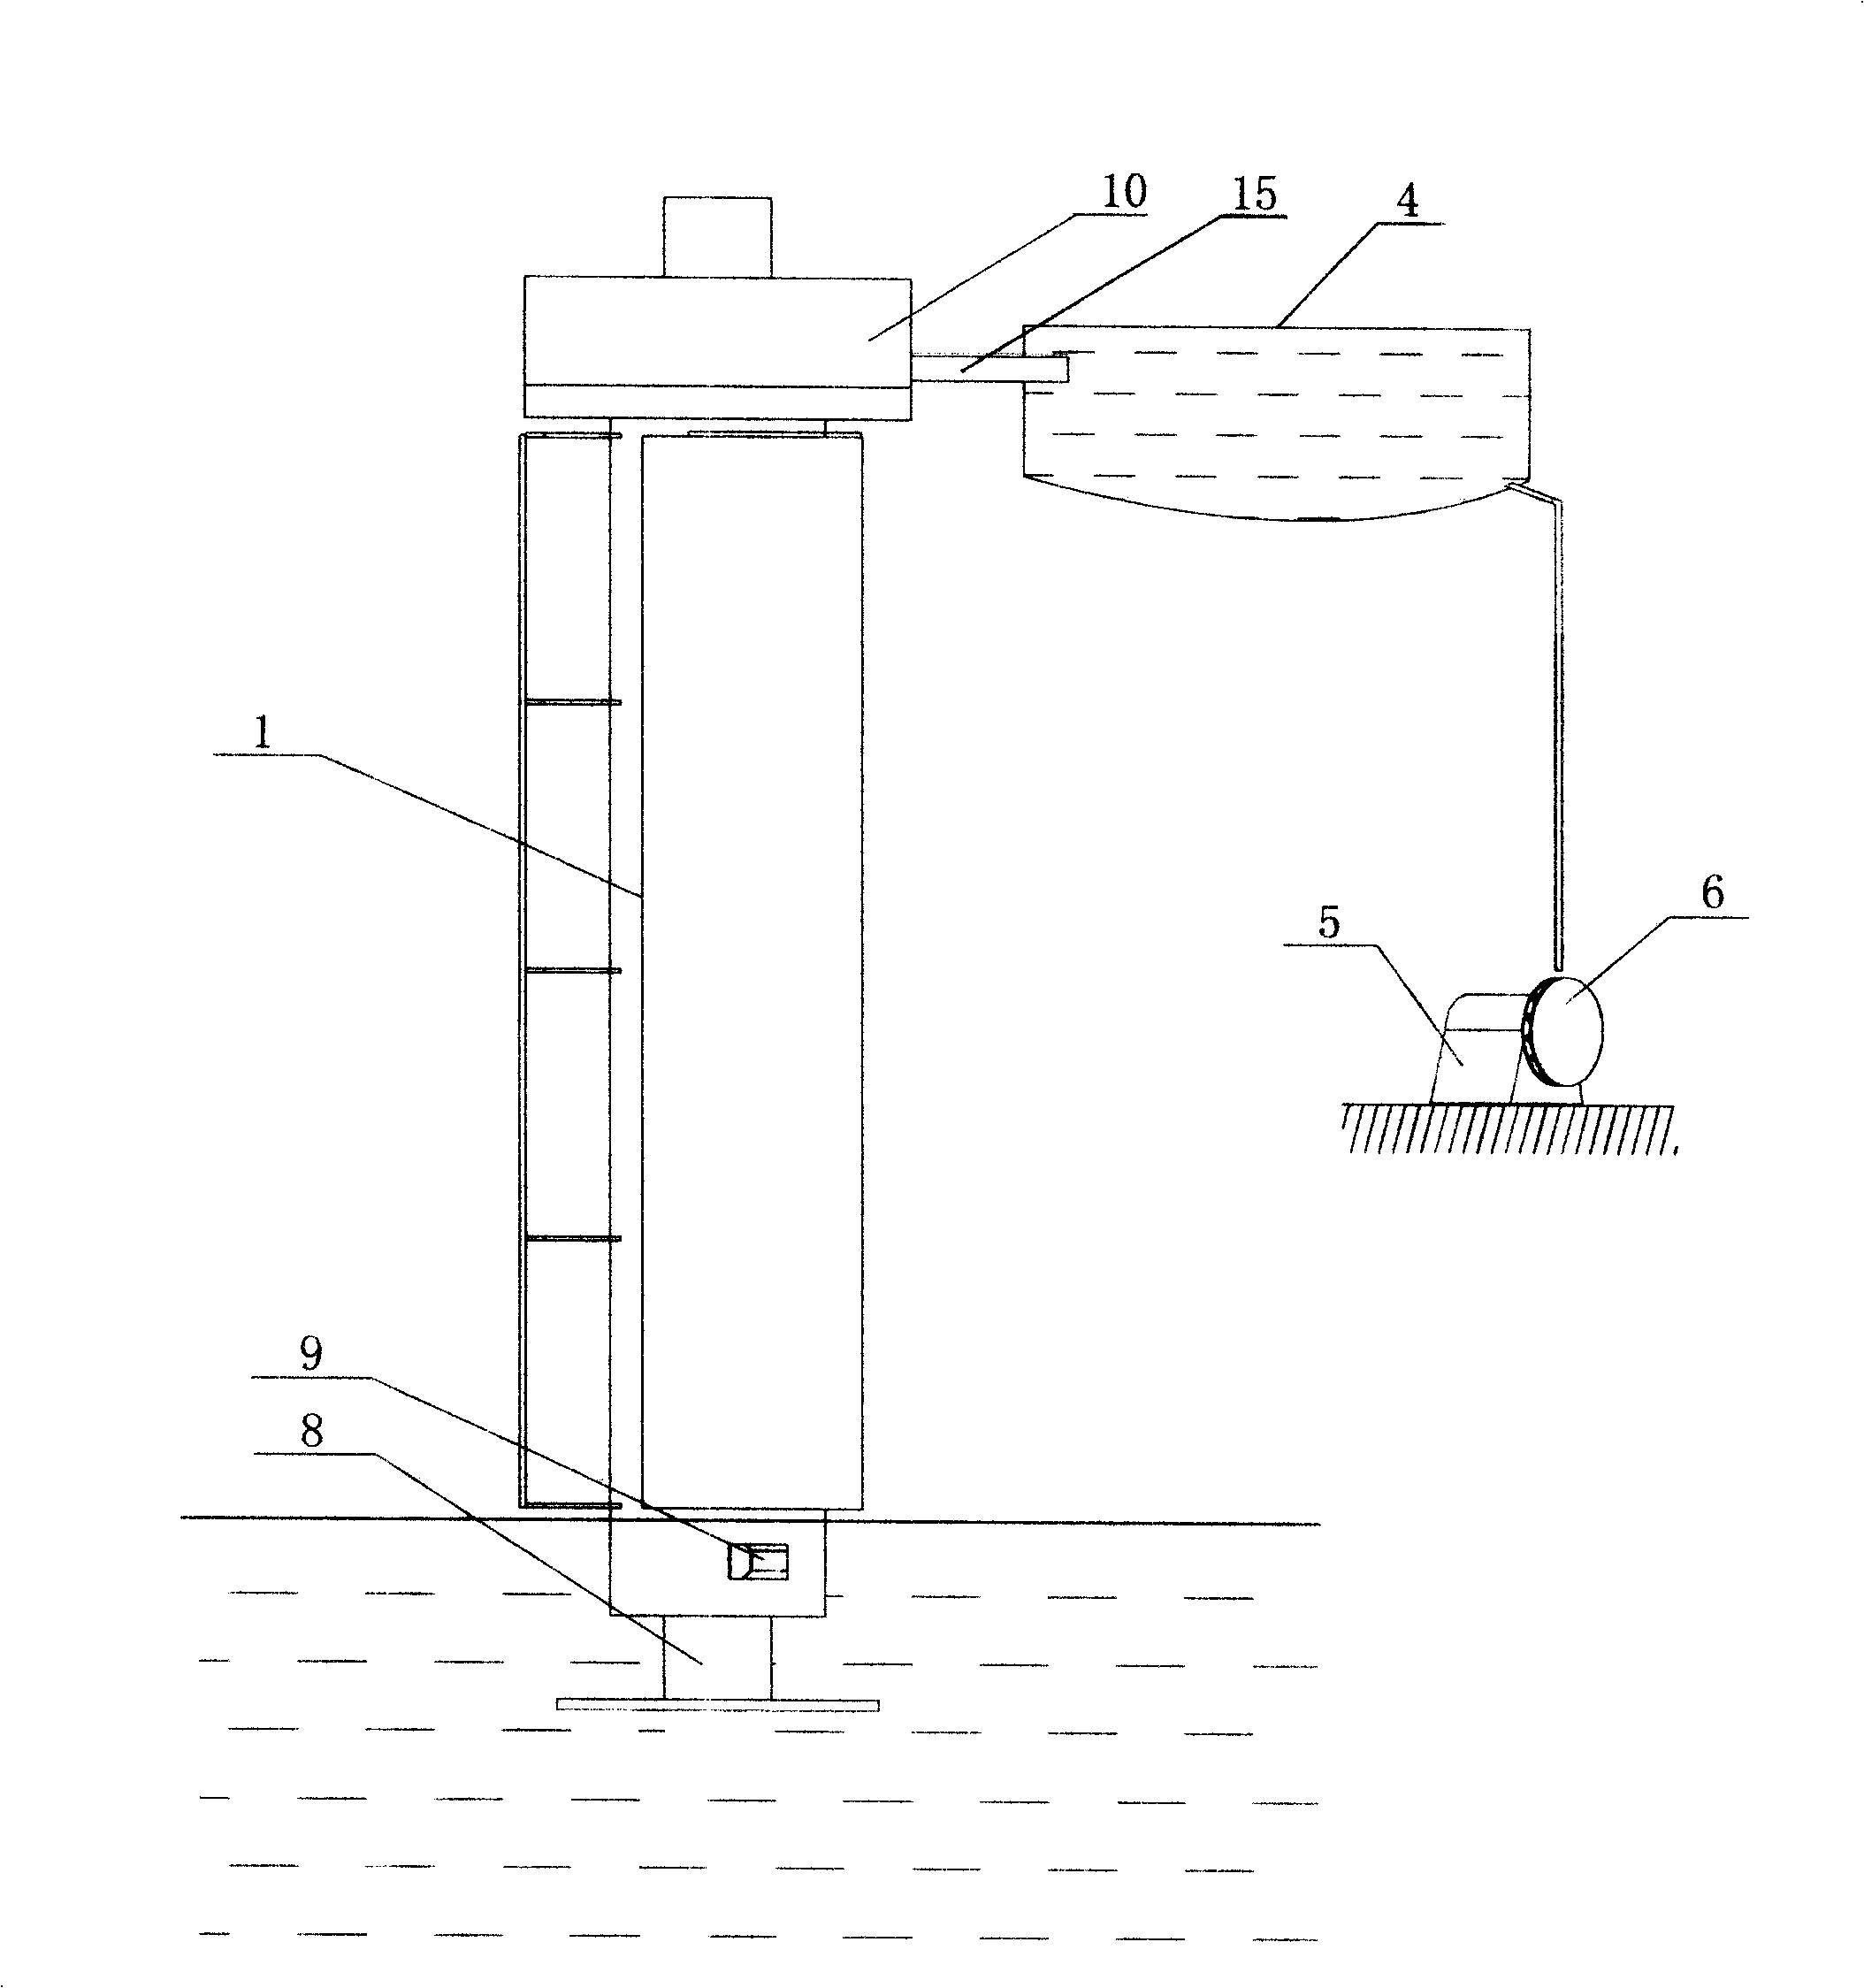 Method and apparatus for generating power using wind energy